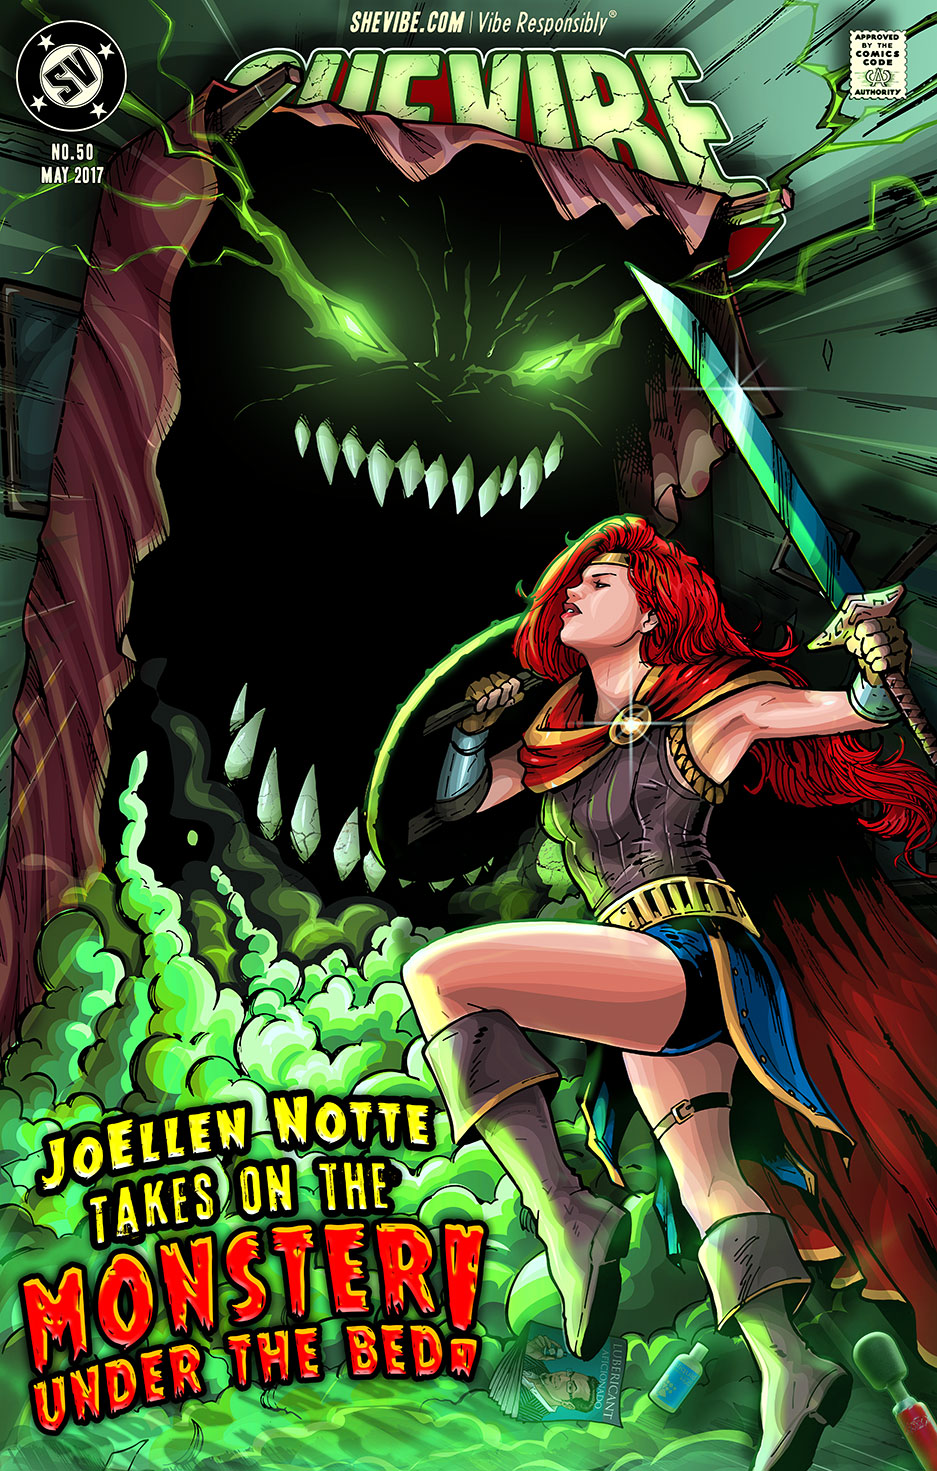 JoEllen drawn as Wonder Woman, holding a sword, battling a monster with sharp teeth and glowing eyes that is rising up from under a bed text reads "JoEllen Notte Takes on The Monster Under The Bed" top of the images features the SheVibe logo